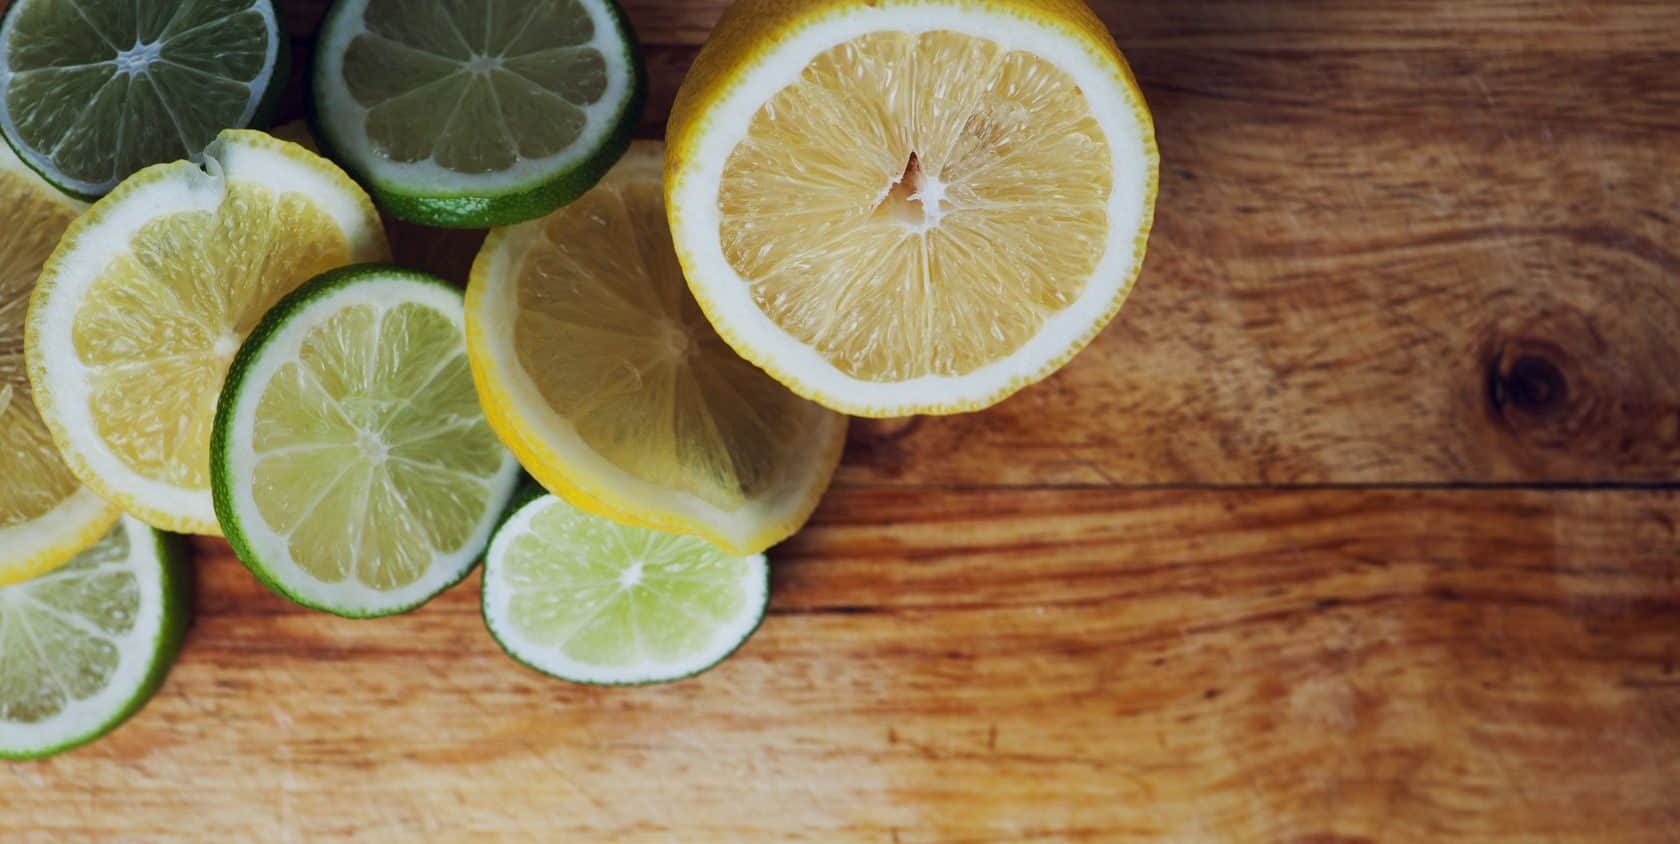 Scents of Citrus - improve house smell